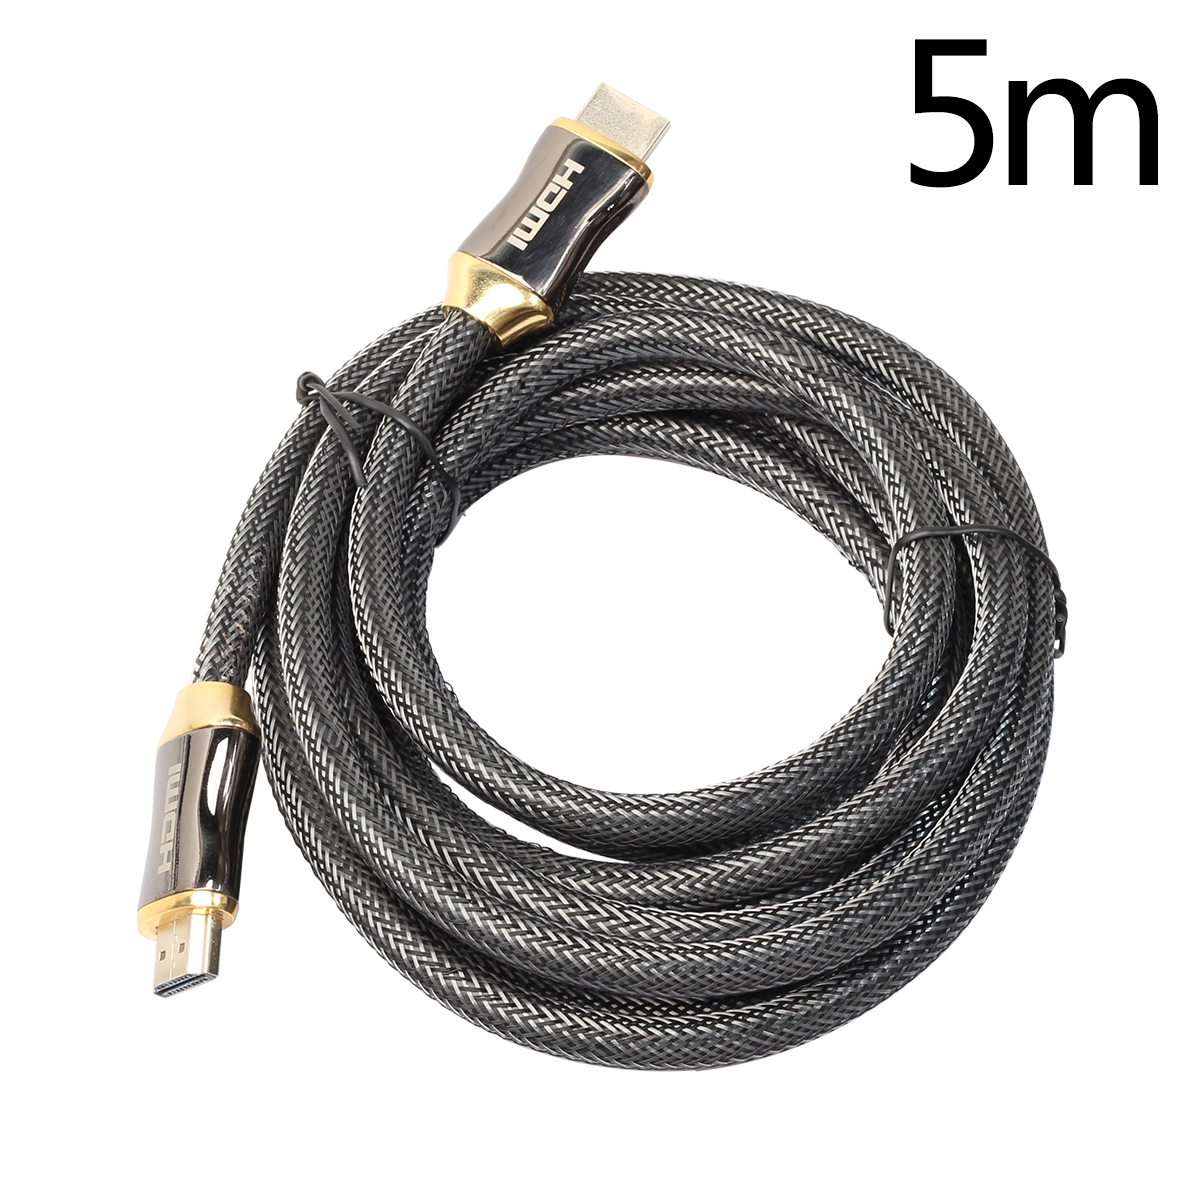 Braided Ultra HD HDMI Cable v2.0 High Speed Ethernet HDTV Cable 5M - Black